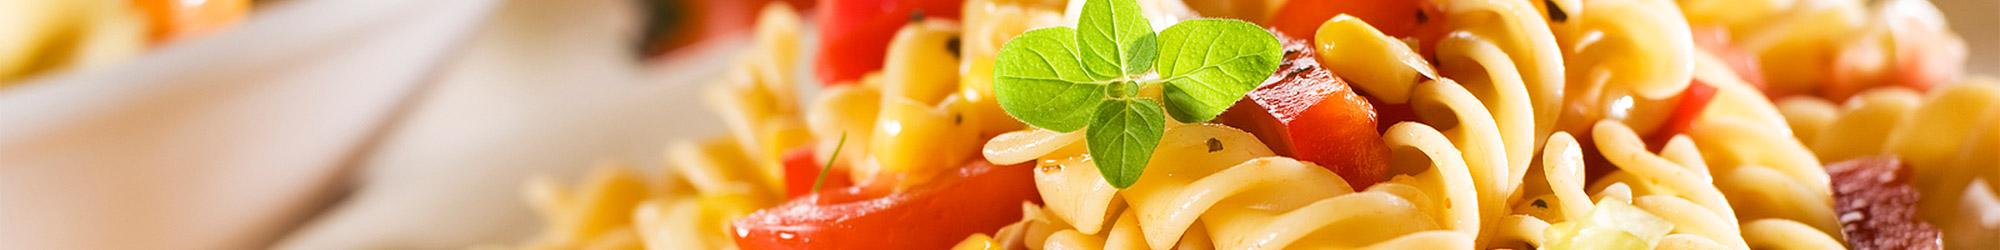 Delicious Macaroni salad with roasted peppers and garnish.